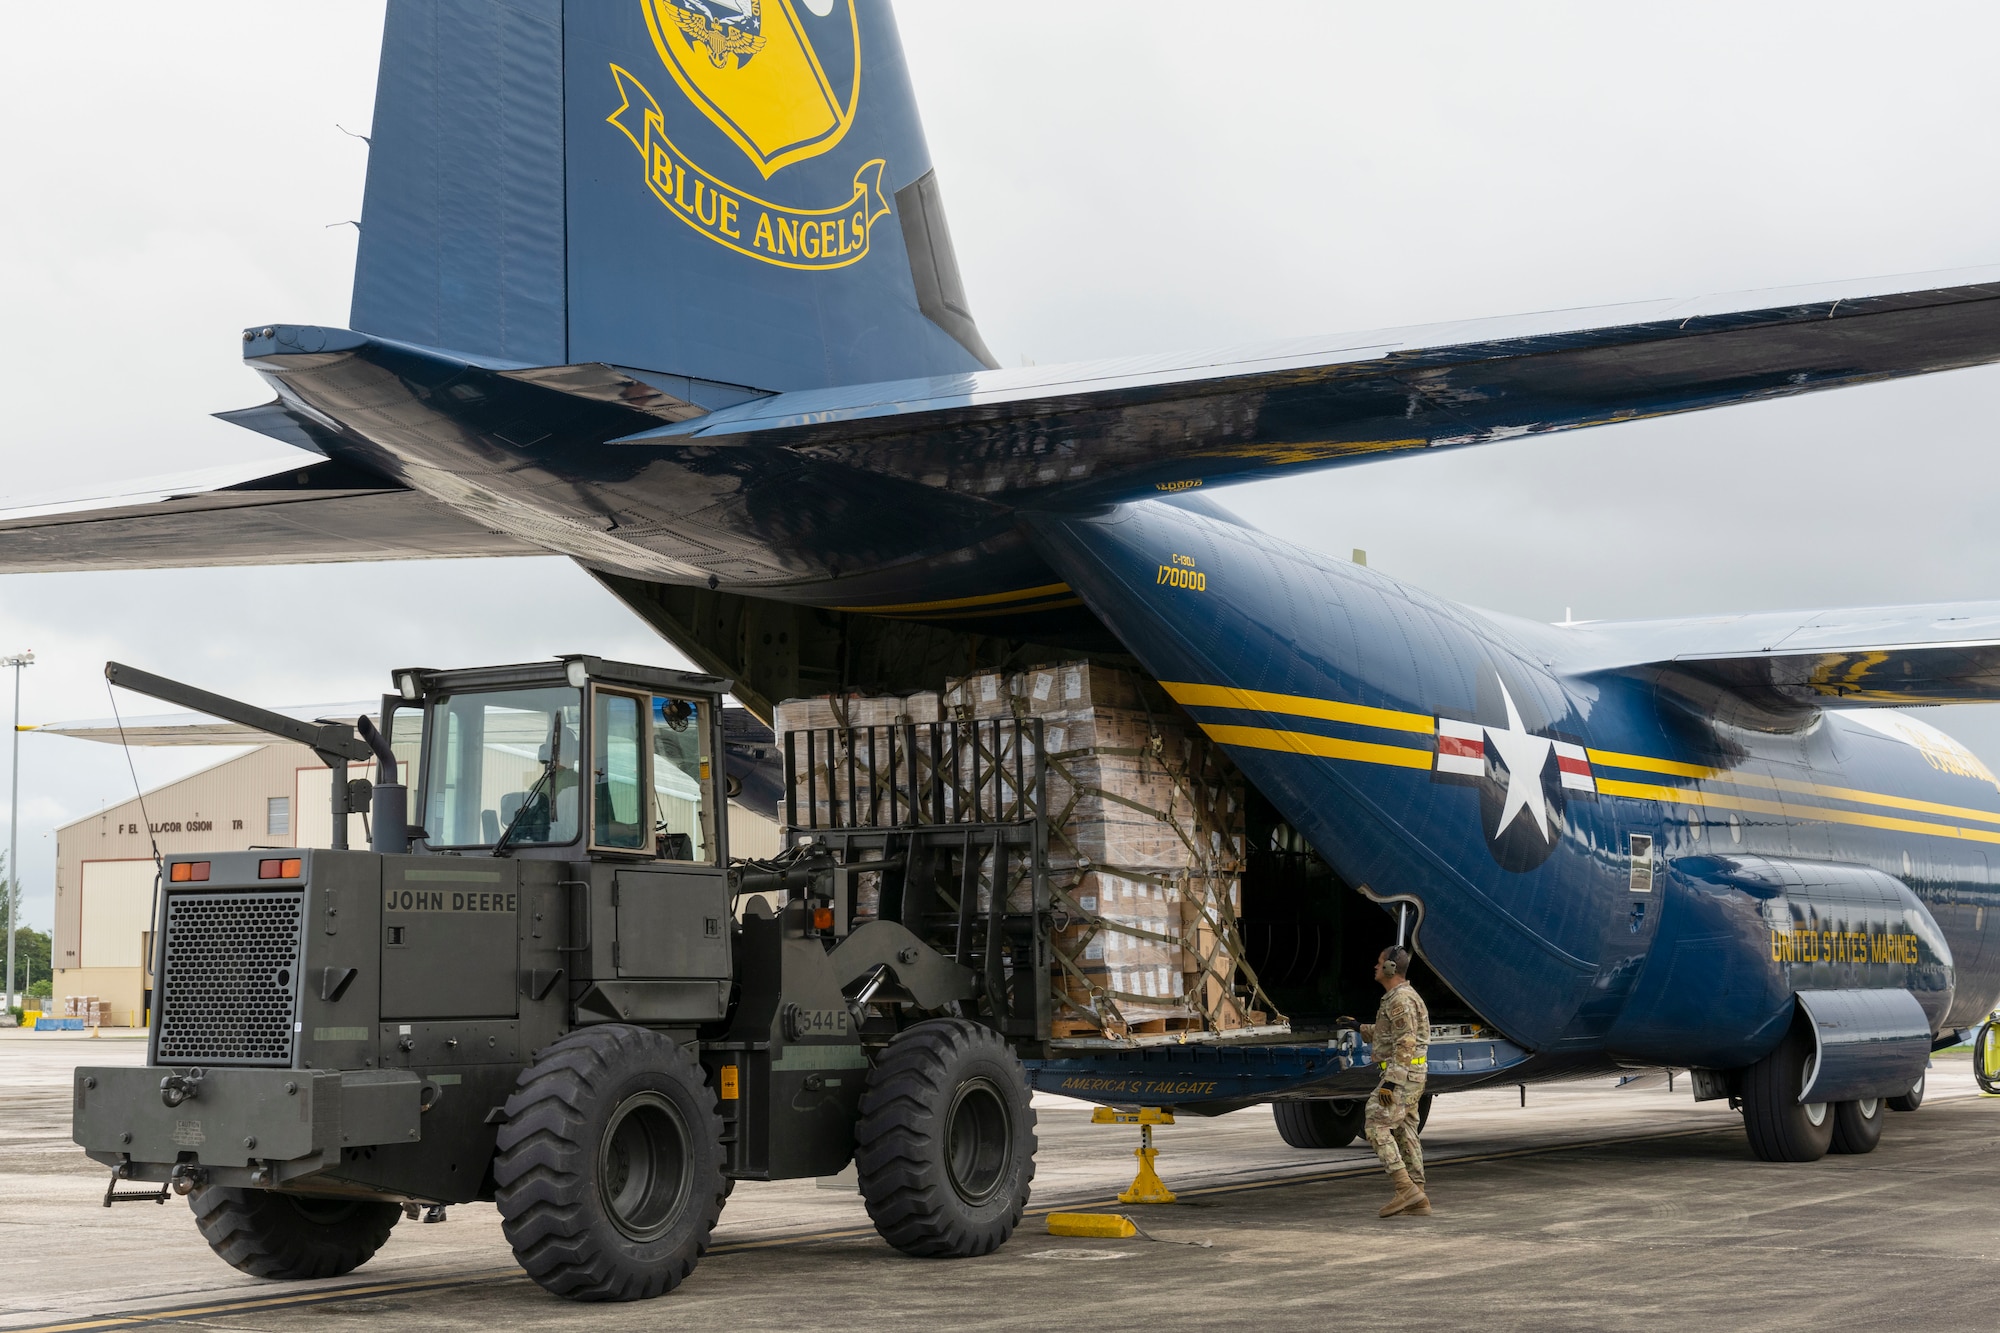 A U.S. Airman with the 156th Wing operates a forklift to unload wooden pallets from a C-130J Hercules “Fat Albert” assigned to the U.S. Navy Flight Demonstration Squadron, the Blue Angels, at the 156th Wing airfield, Muñiz Air National Guard Base, Carolina, Puerto Rico, Dec. 15, 2023. The U.S. Navy Blue Angels participated in a campaign with Toys for Tots, which impacted communities across the Island in an effort to distribute more than 25,000 toys to local children during the holiday season. (U.S. Air National Guard photo by Airman 1st Class Victoria Jewett)